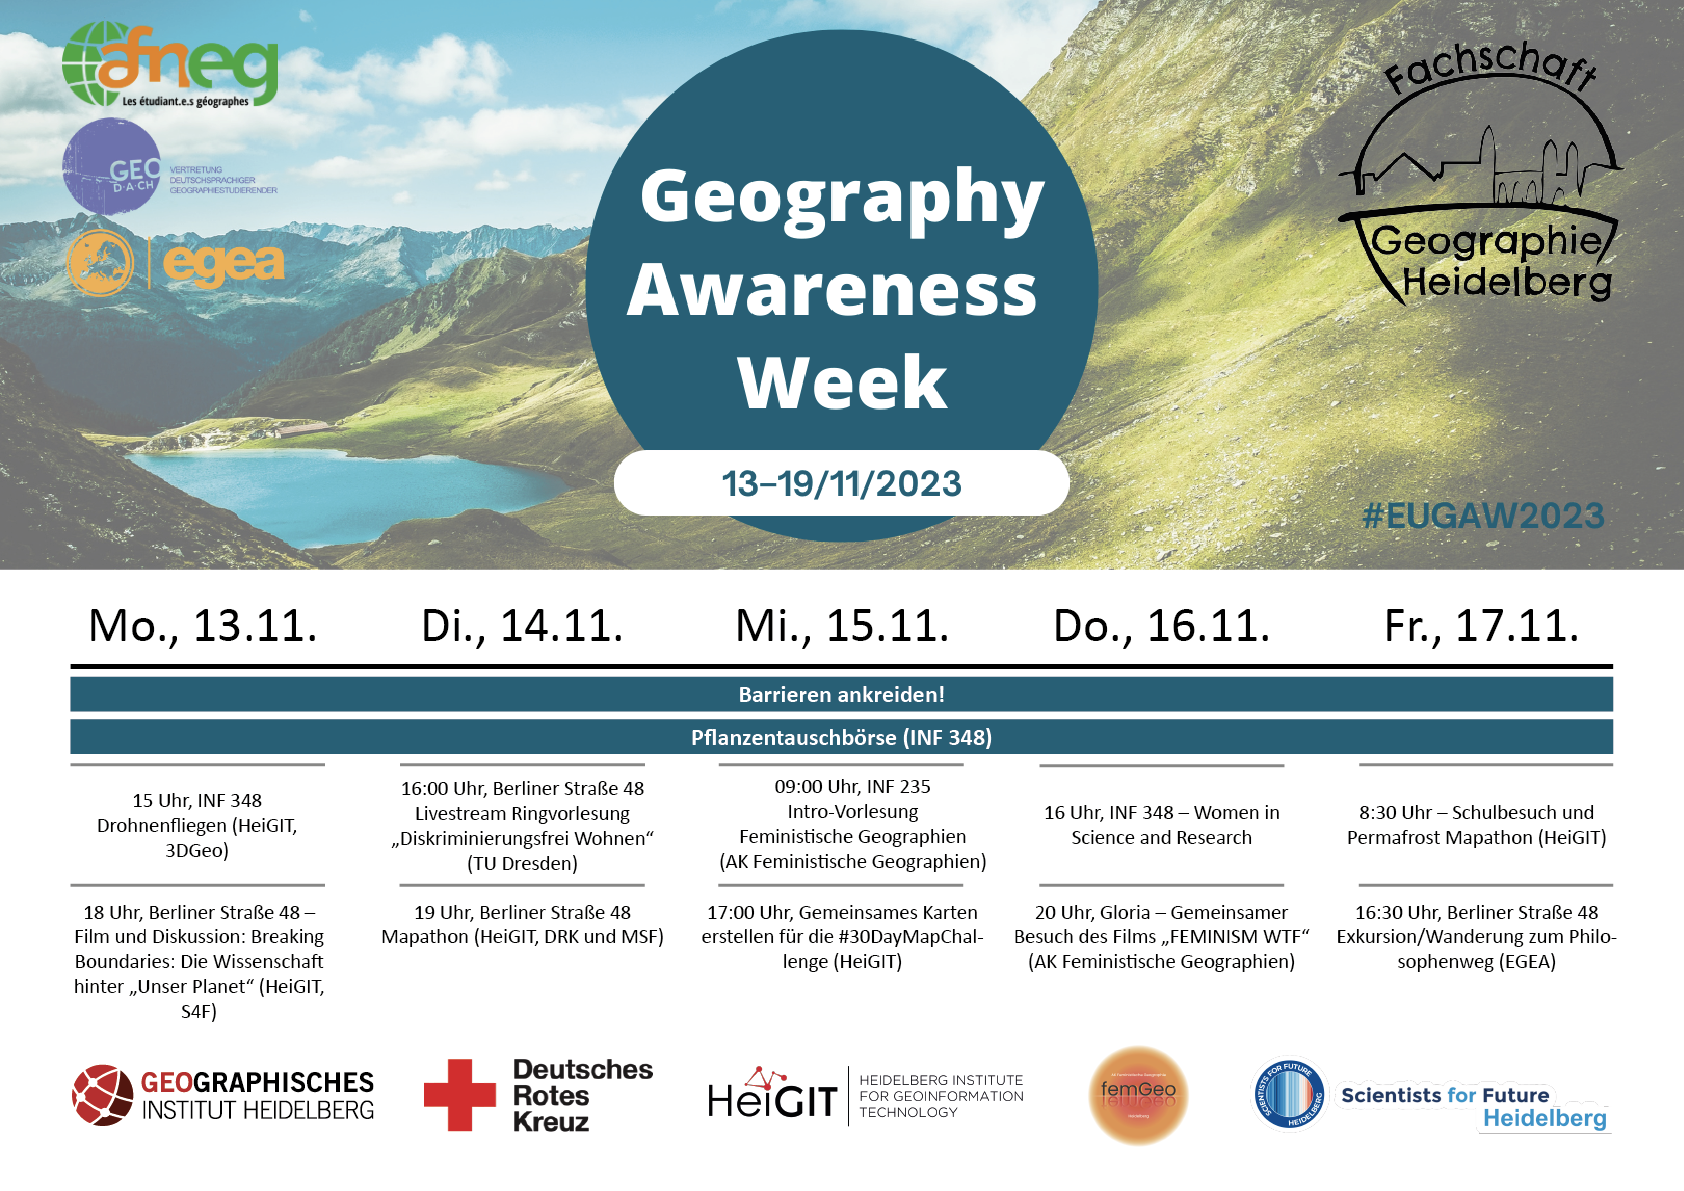 HeiGIT participates at this year’s Geography Awareness Week